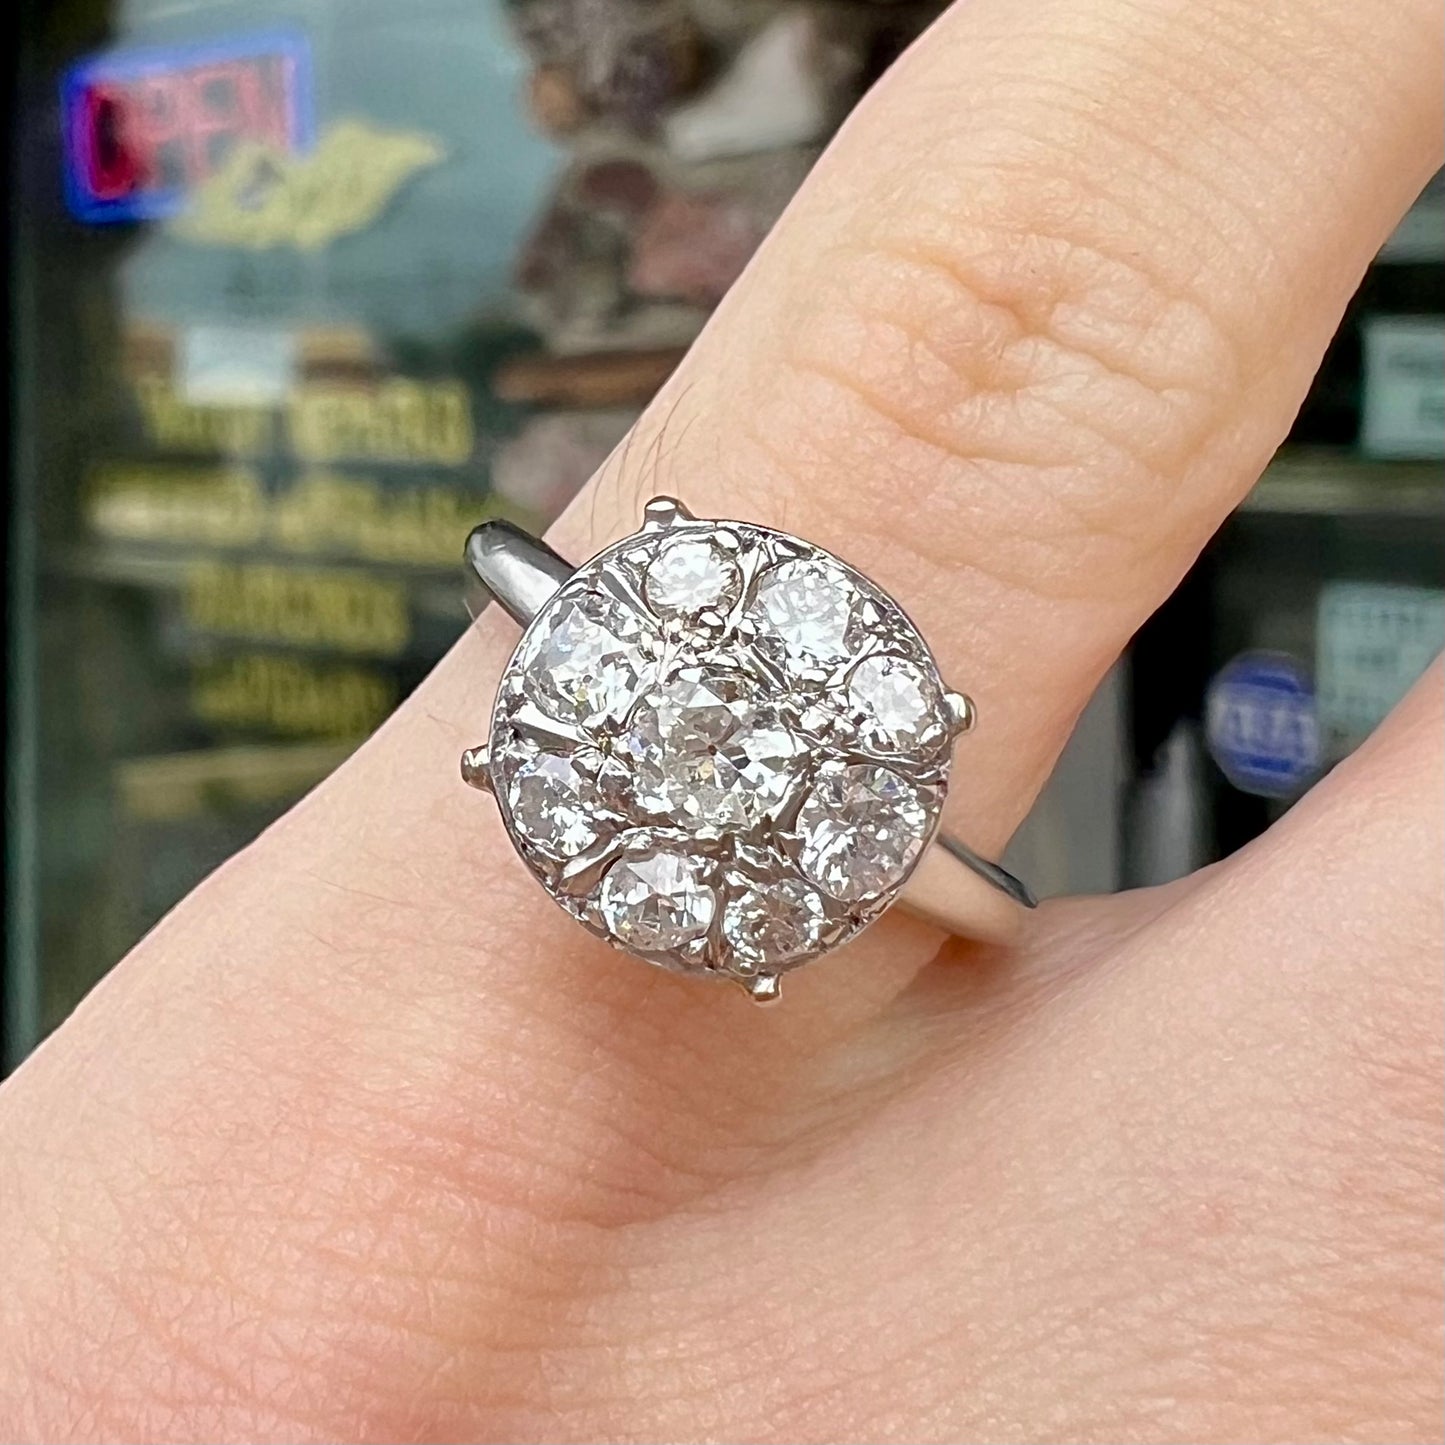 Edwardian Euro Cut Diamond Cluster Ring in 14kt White Gold, c.1910's